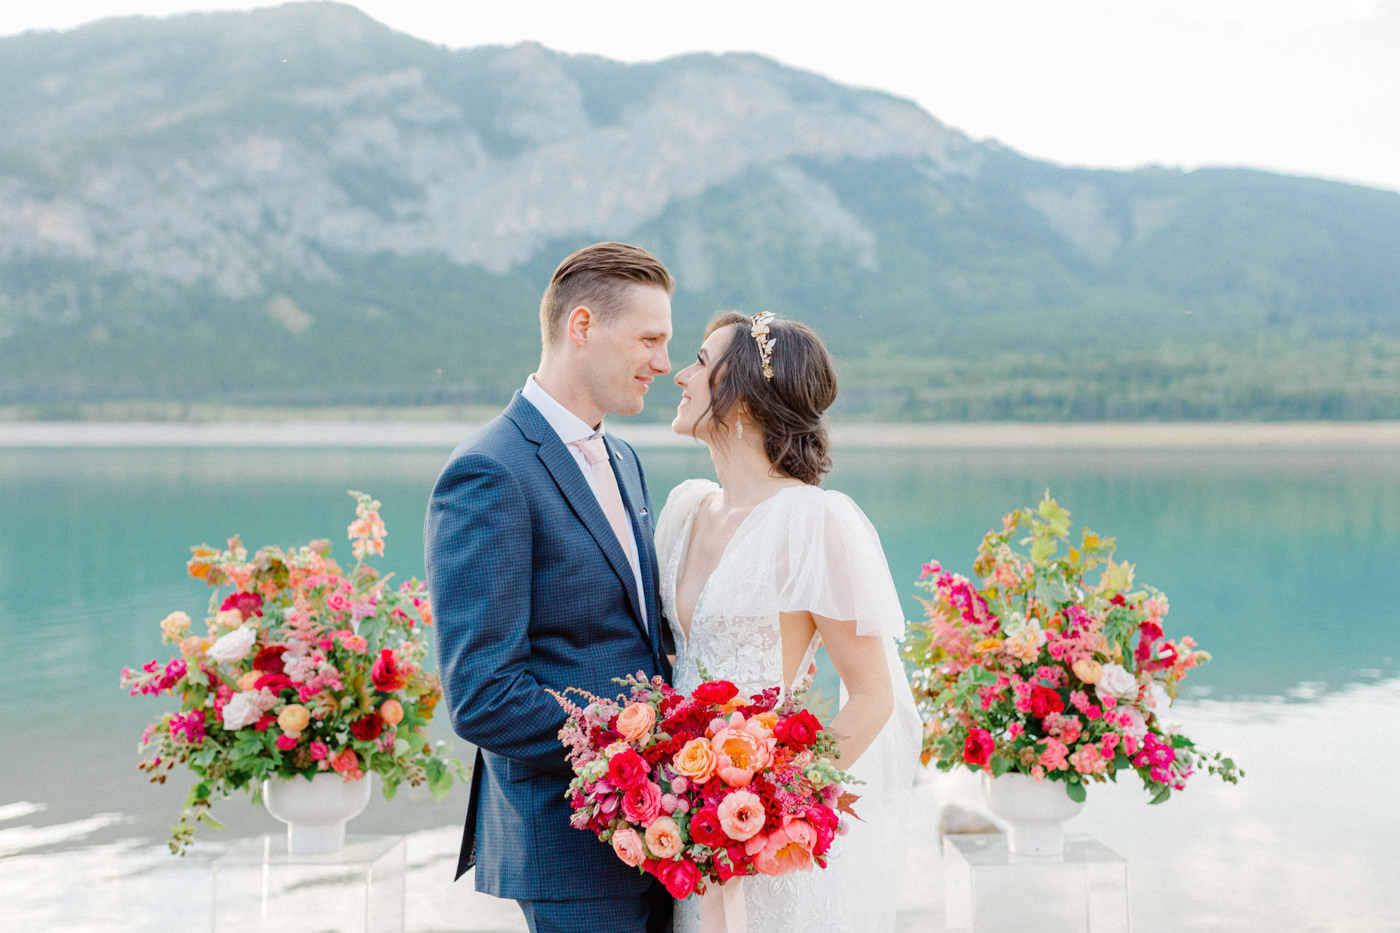 Lakeside elopement inspiration with mountain views